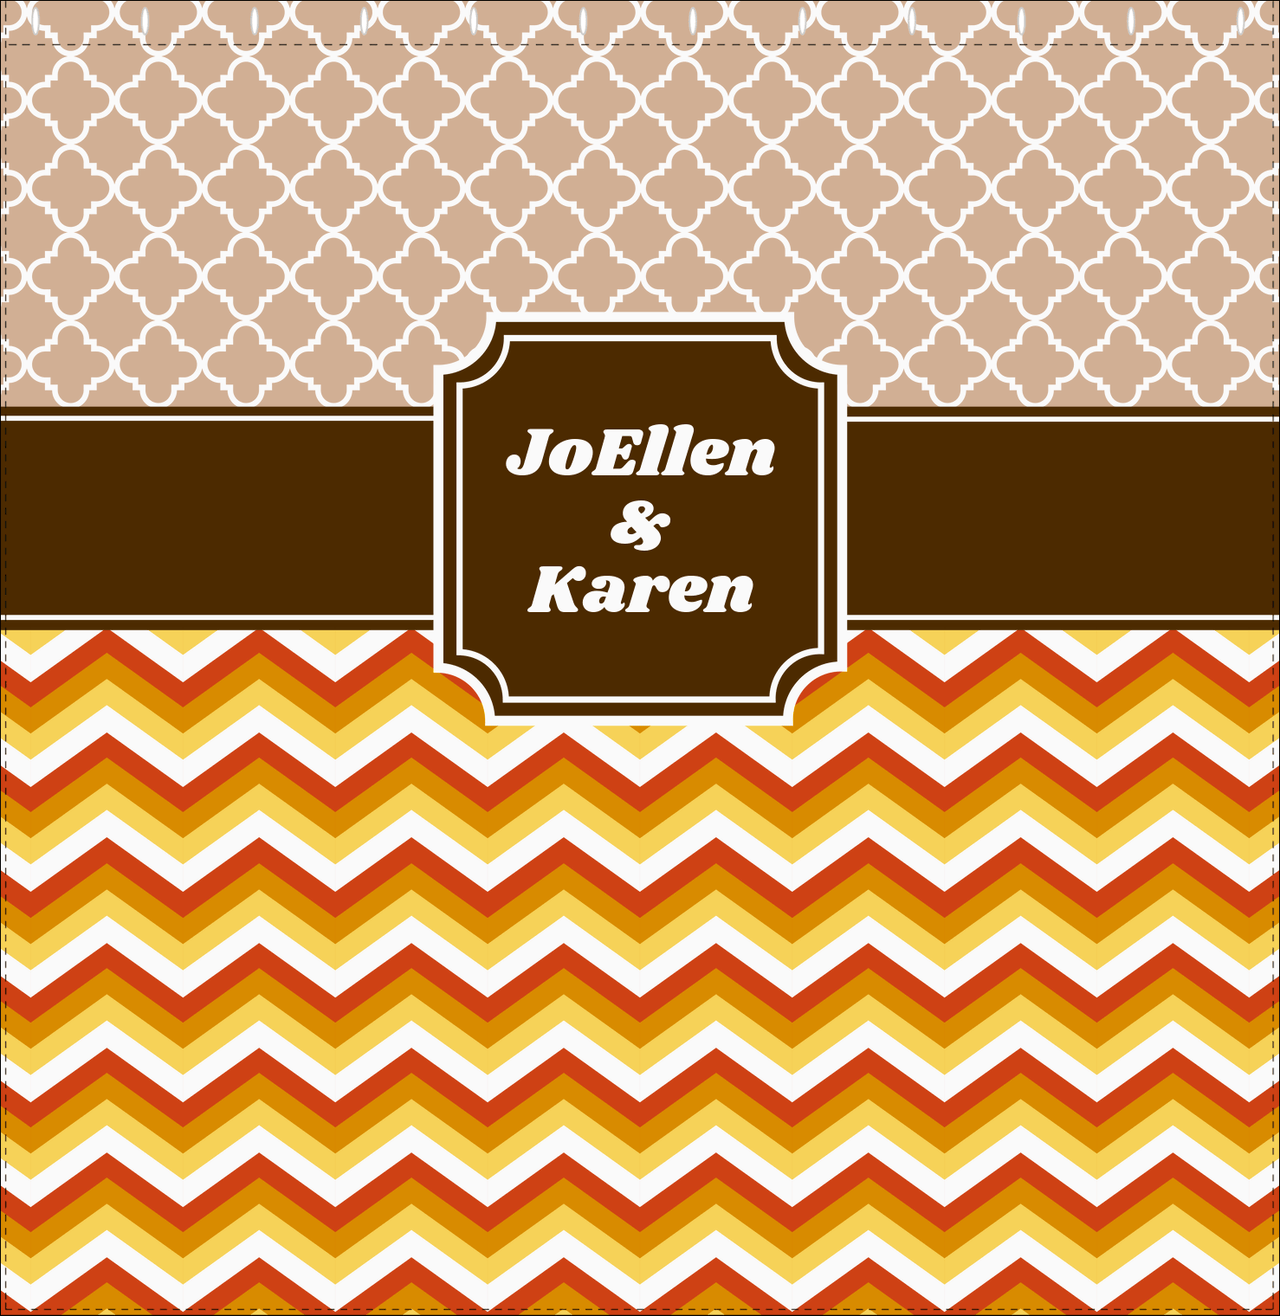 Personalized Quatrefoil and Chevron IV Shower Curtain - Brown and Orange - Stamp Nameplate - Decorate View